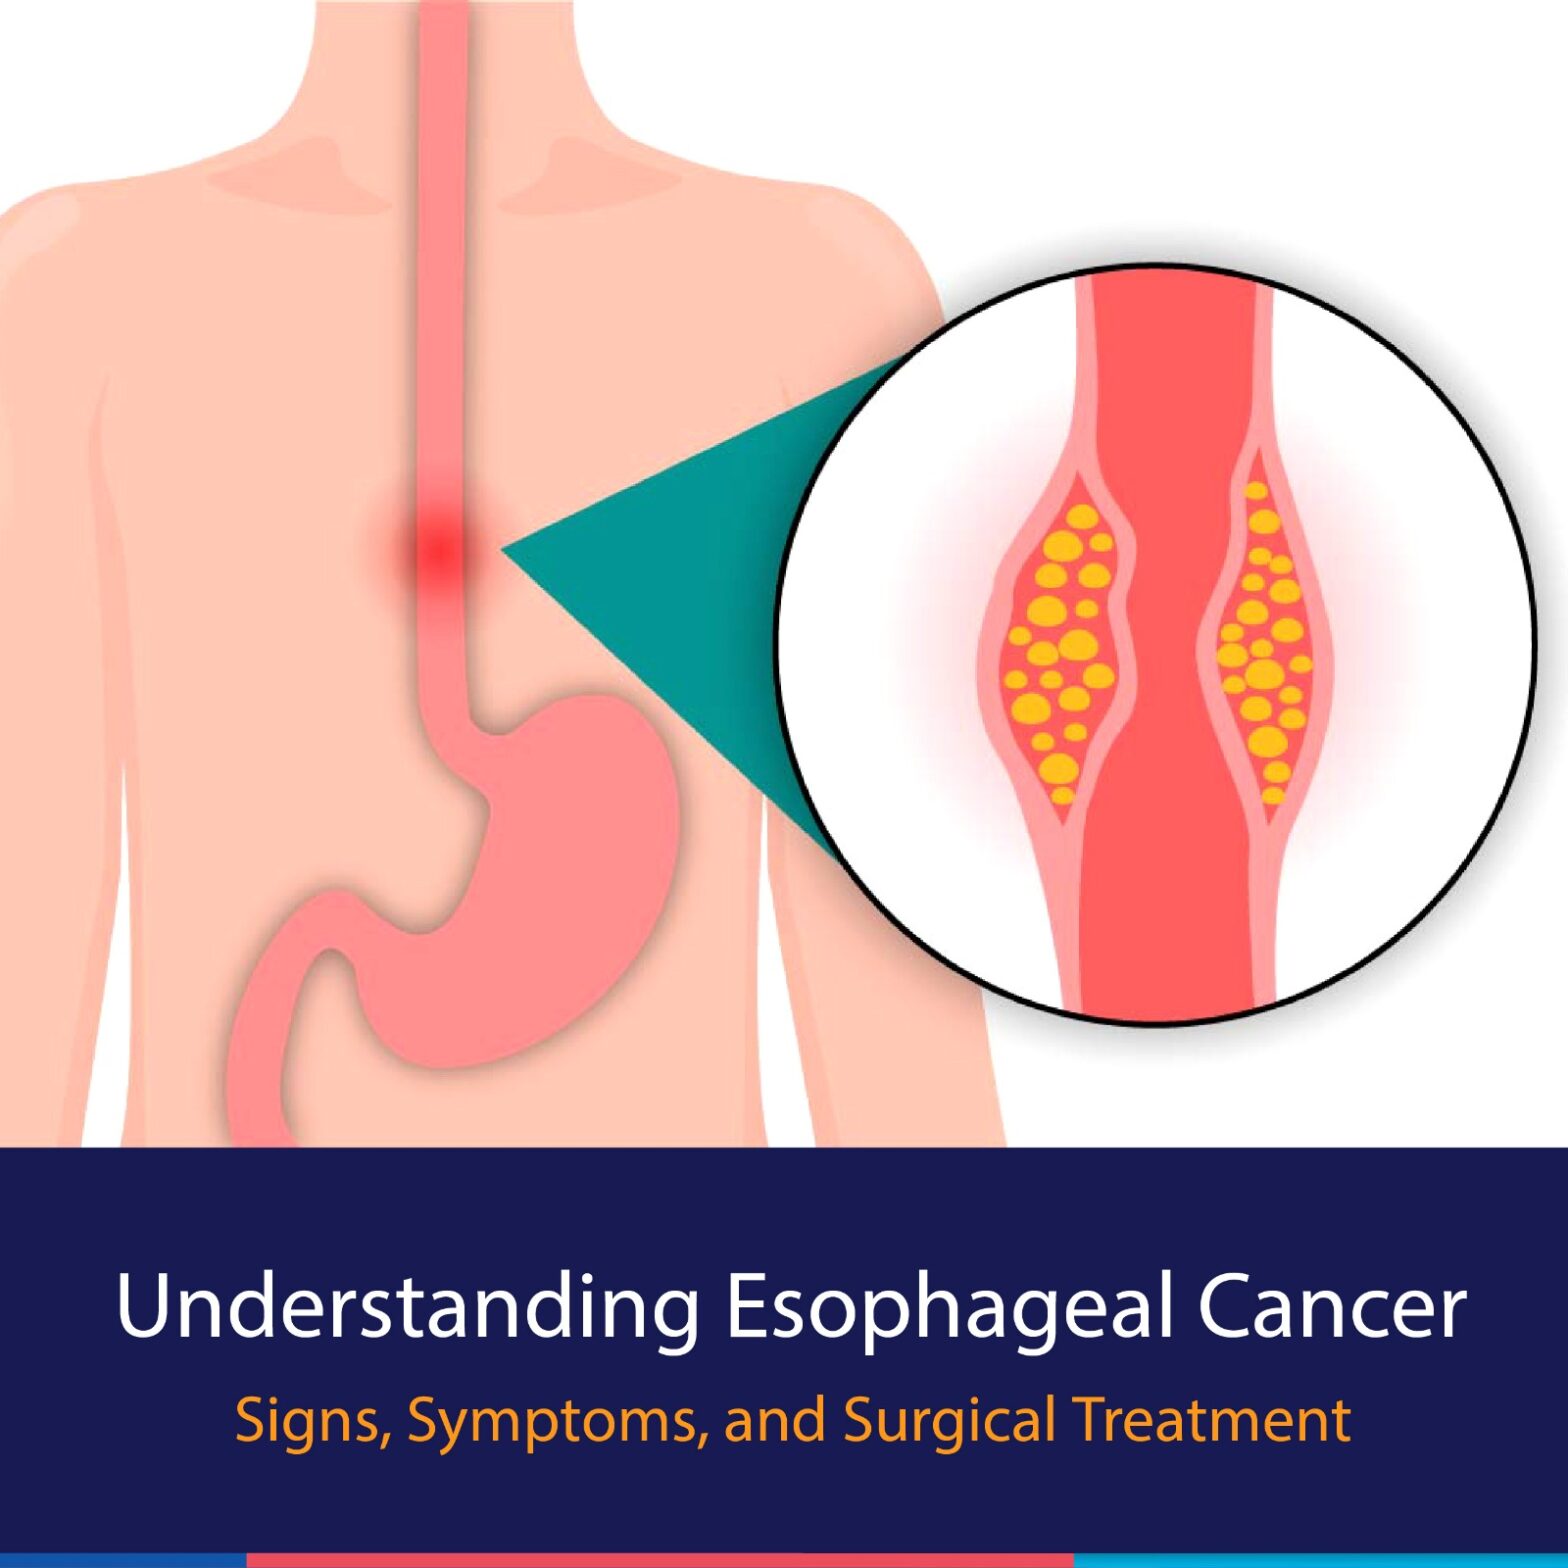 Esophageal Cancer - Signs, Symptoms and Surgical Treatment